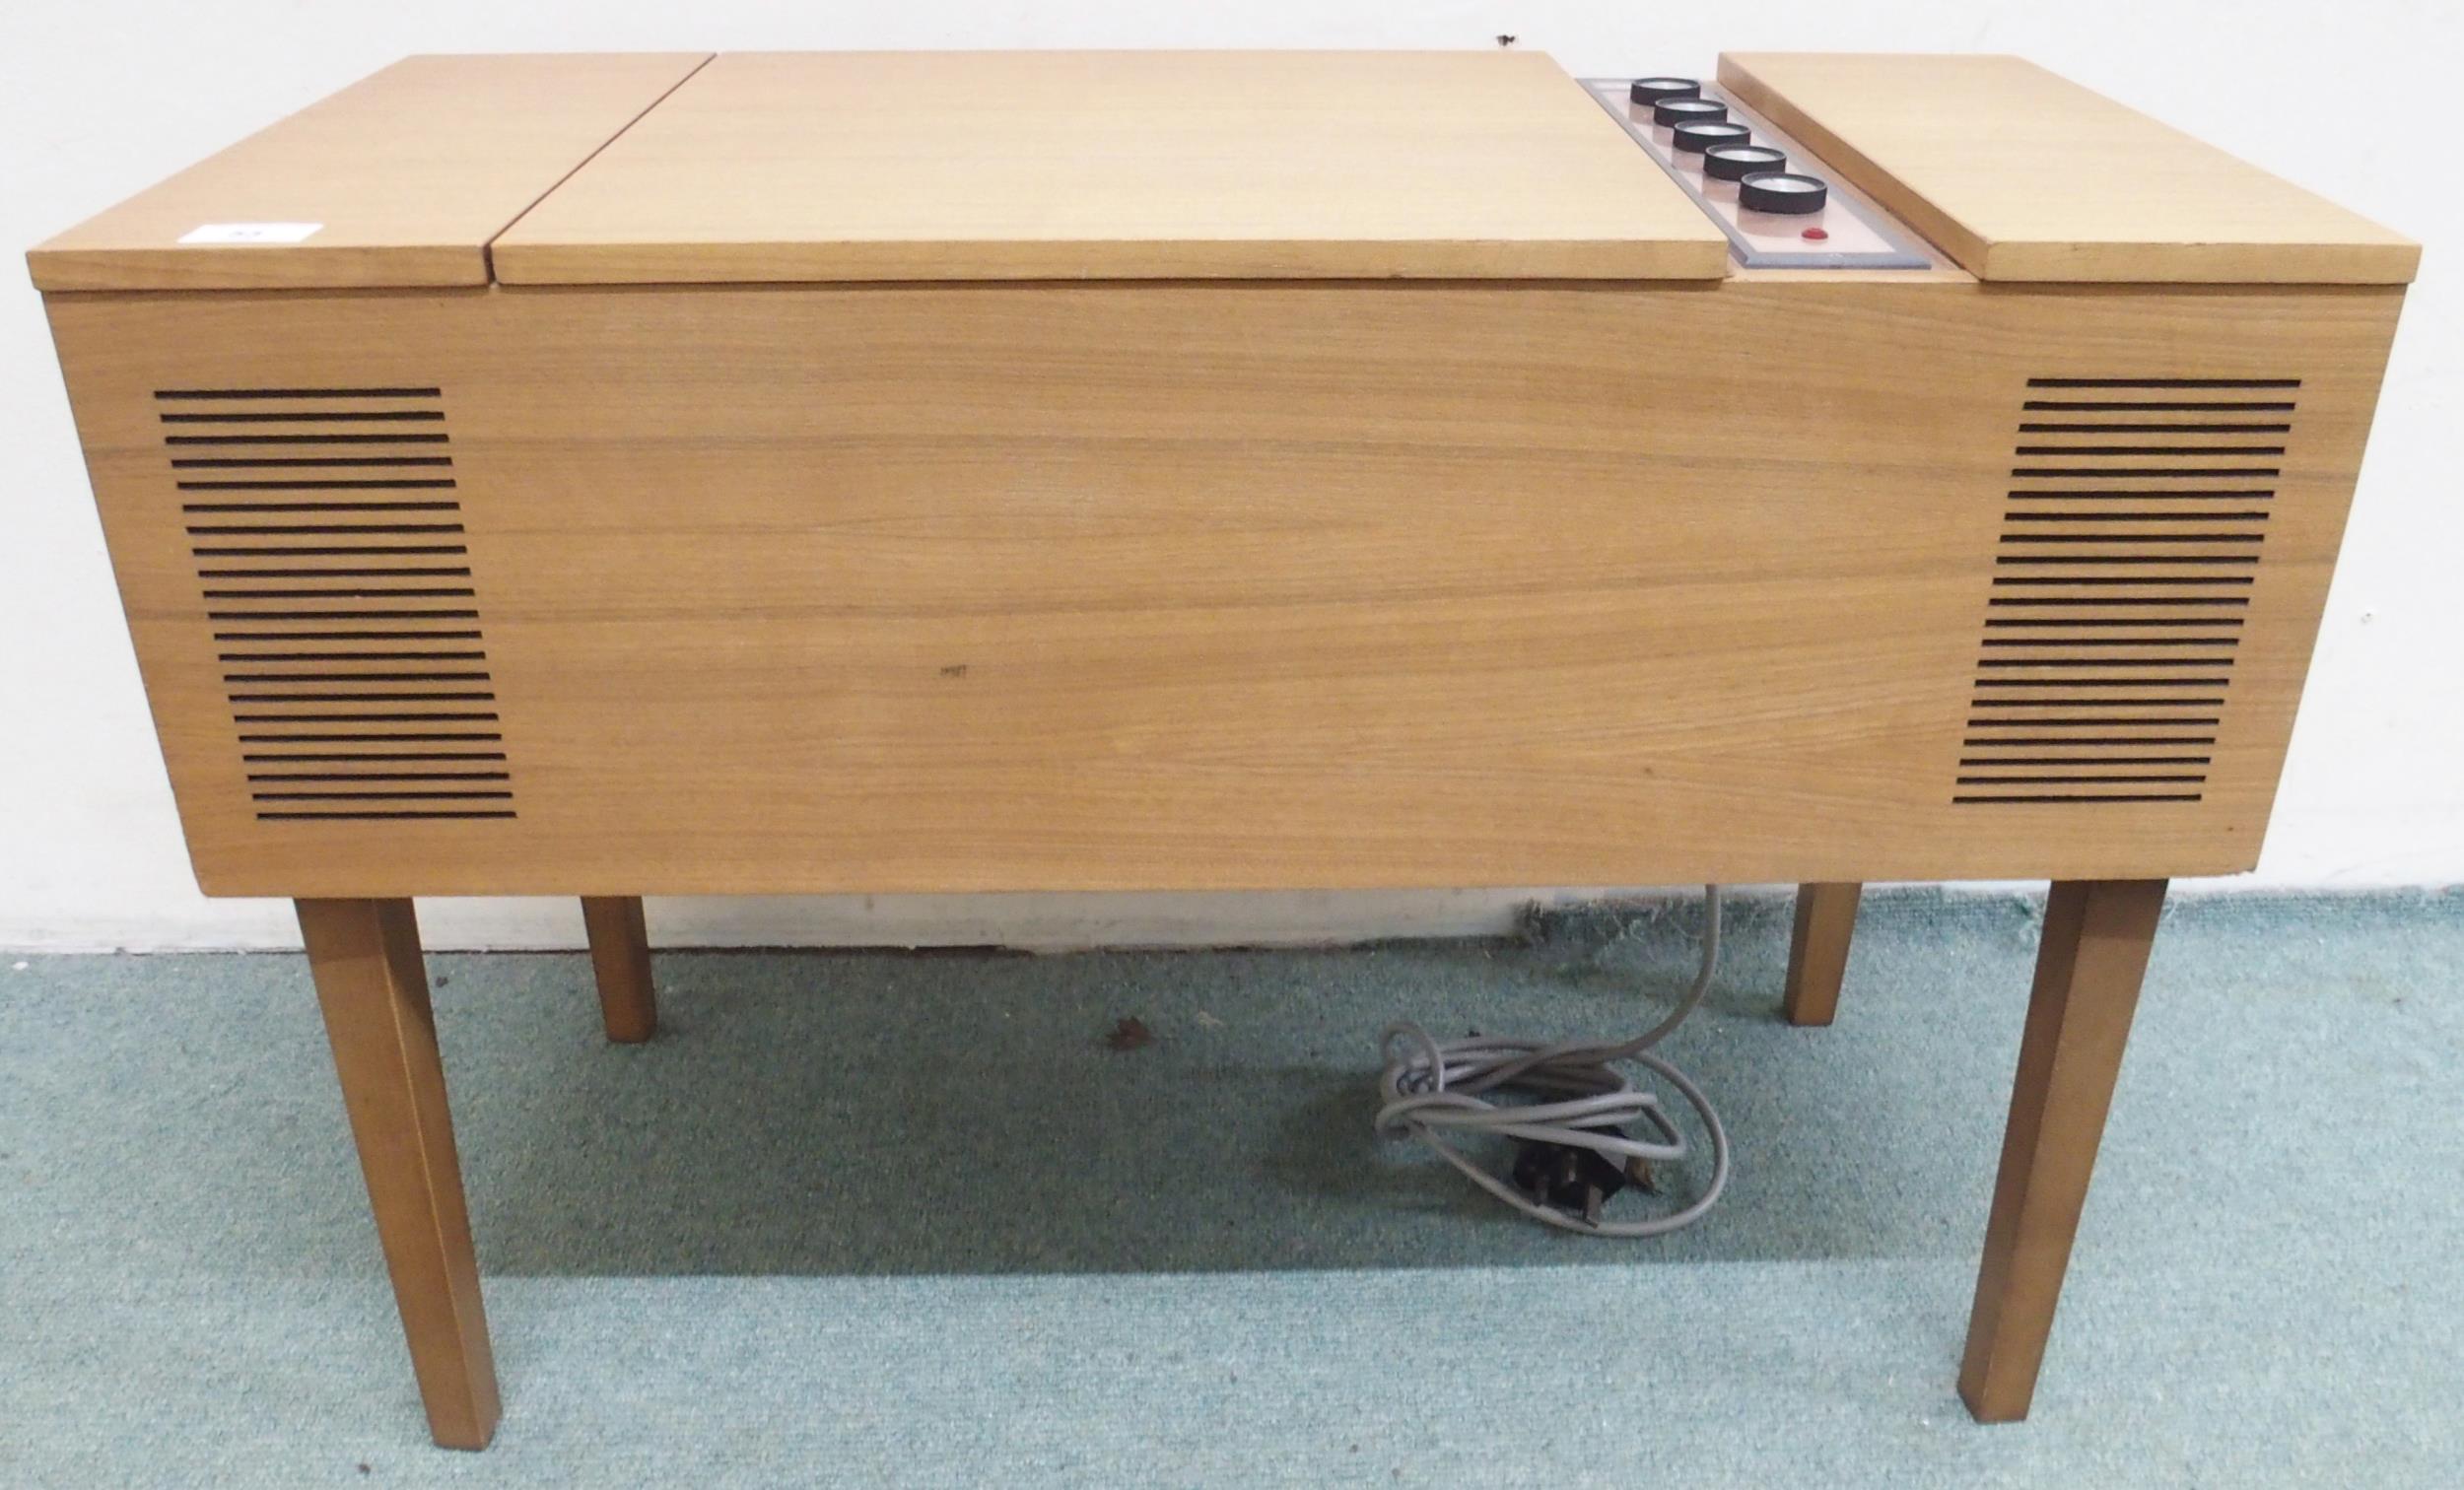 A mid 20th century teak cased HMV record stereo with Garrard 2025TC turntable, 51cm high x 74cm wide - Image 6 of 6